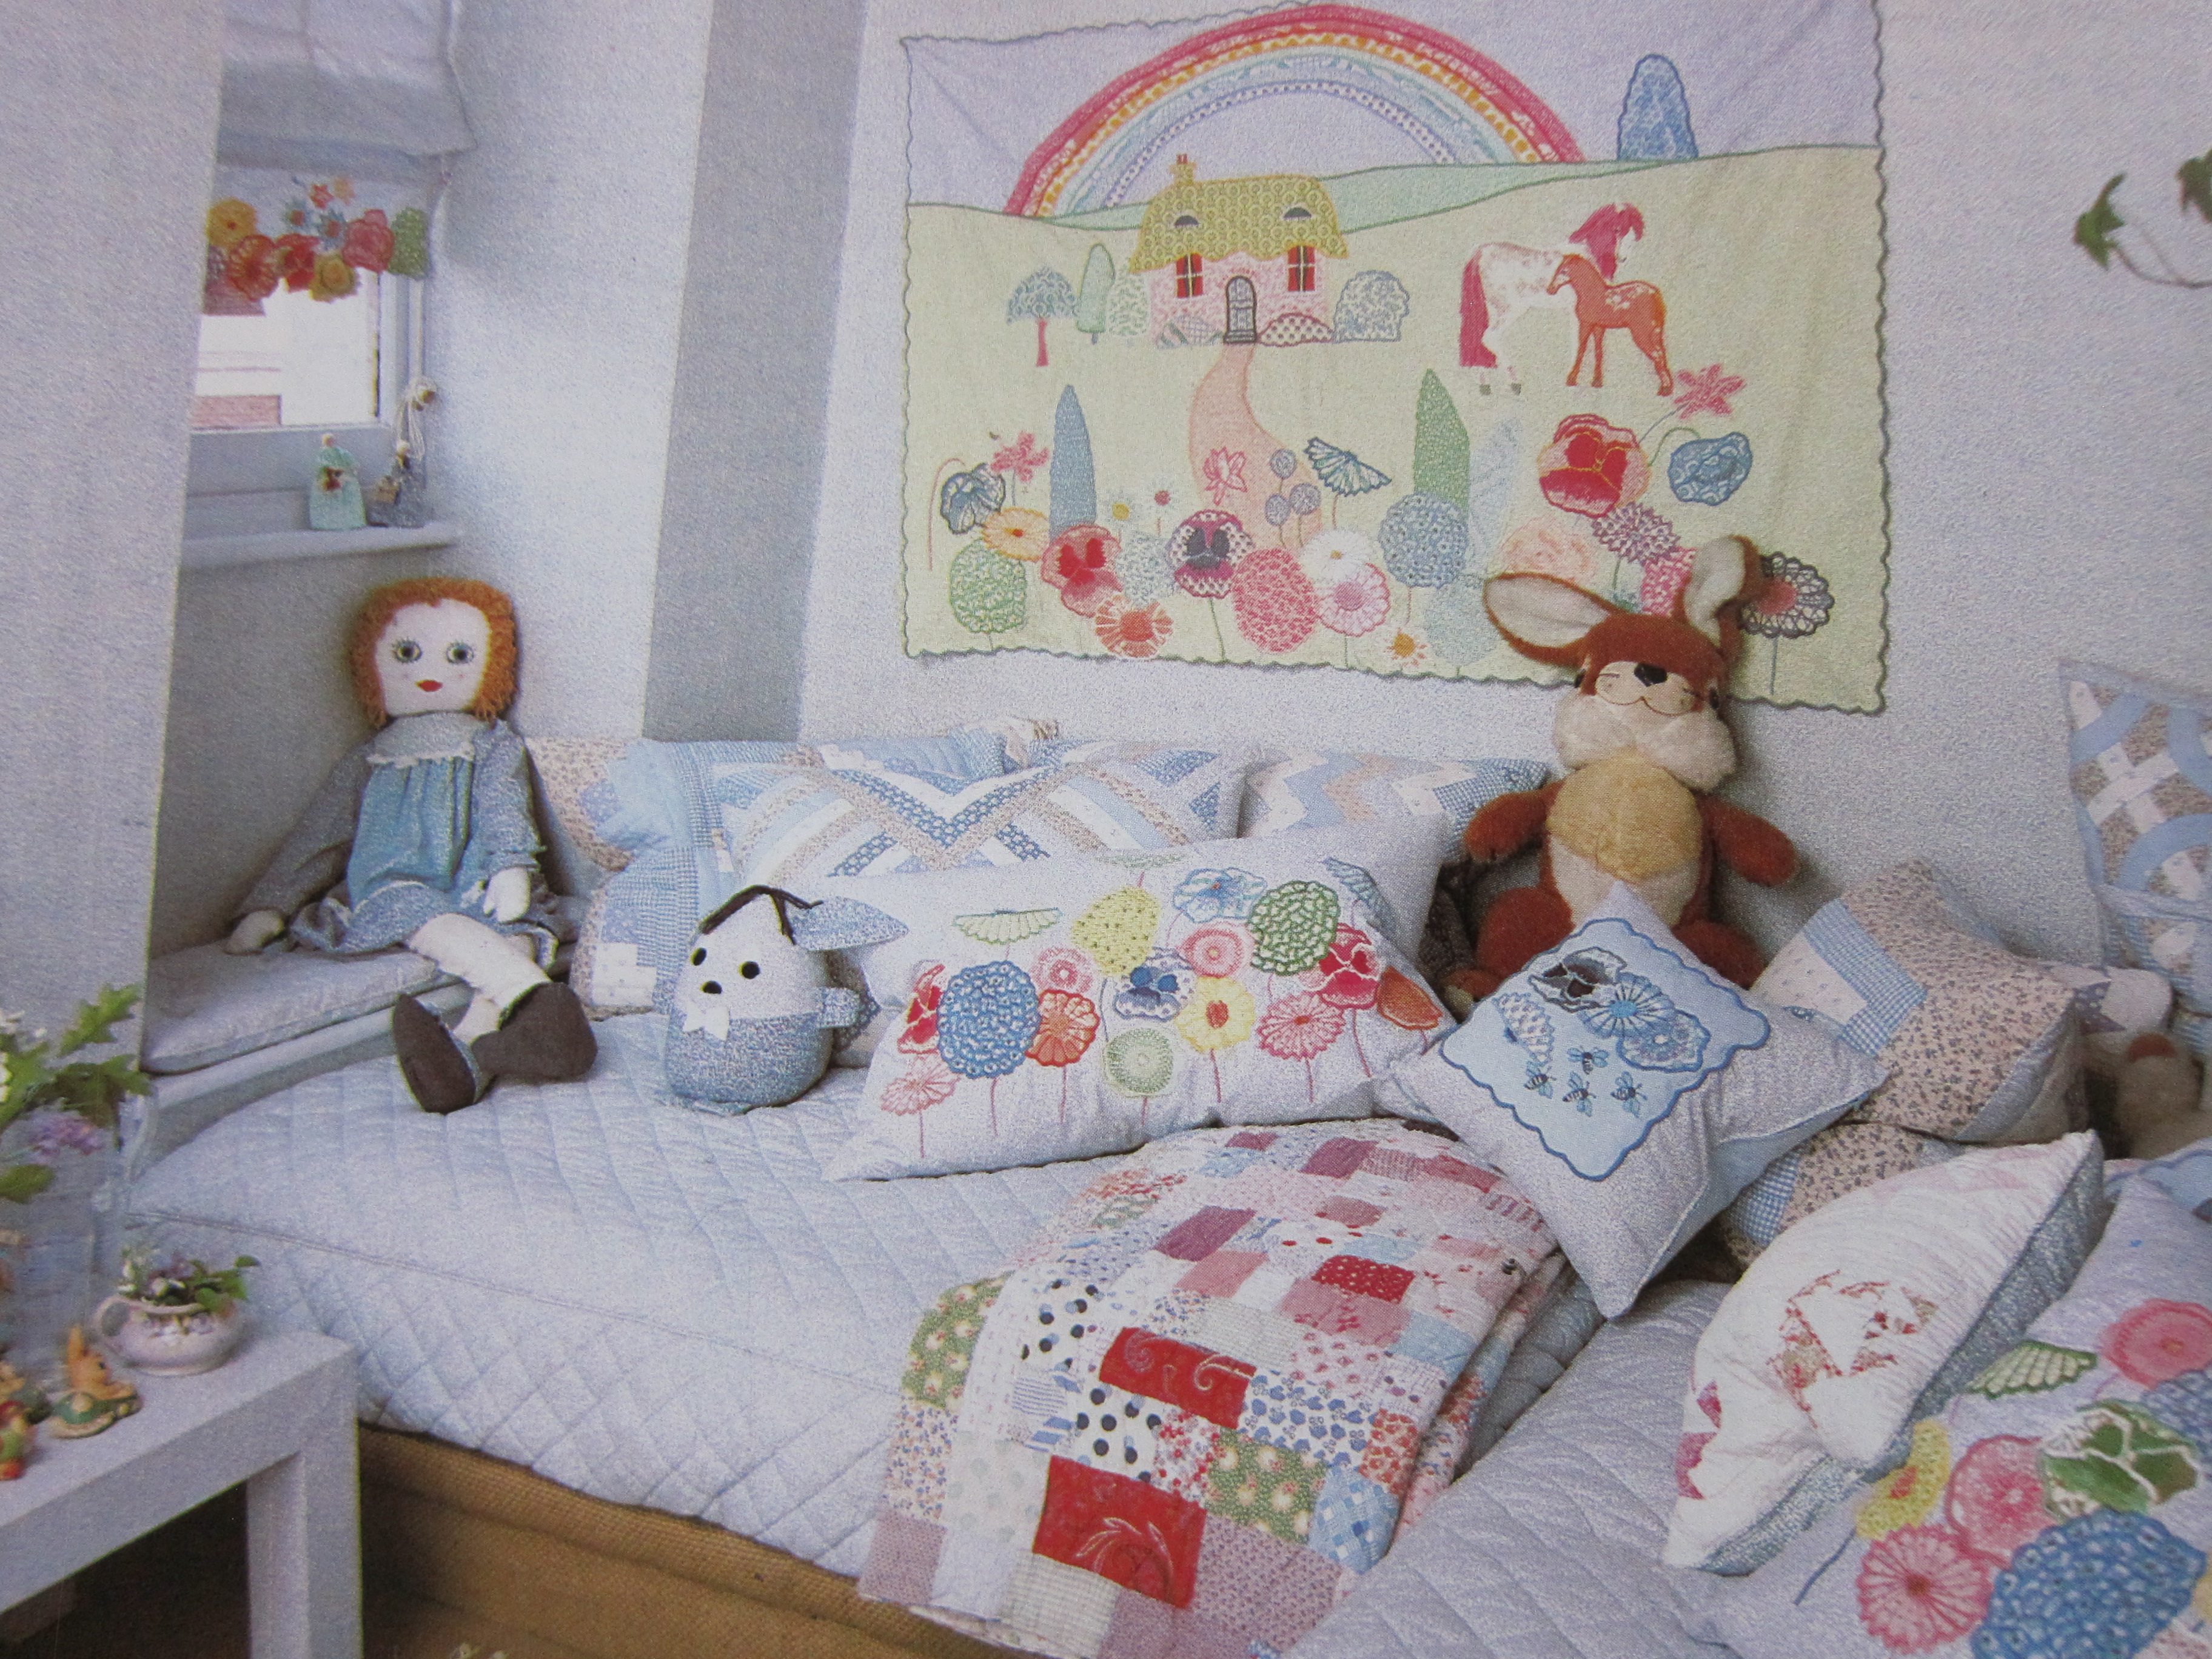 Kids Room from 1980s